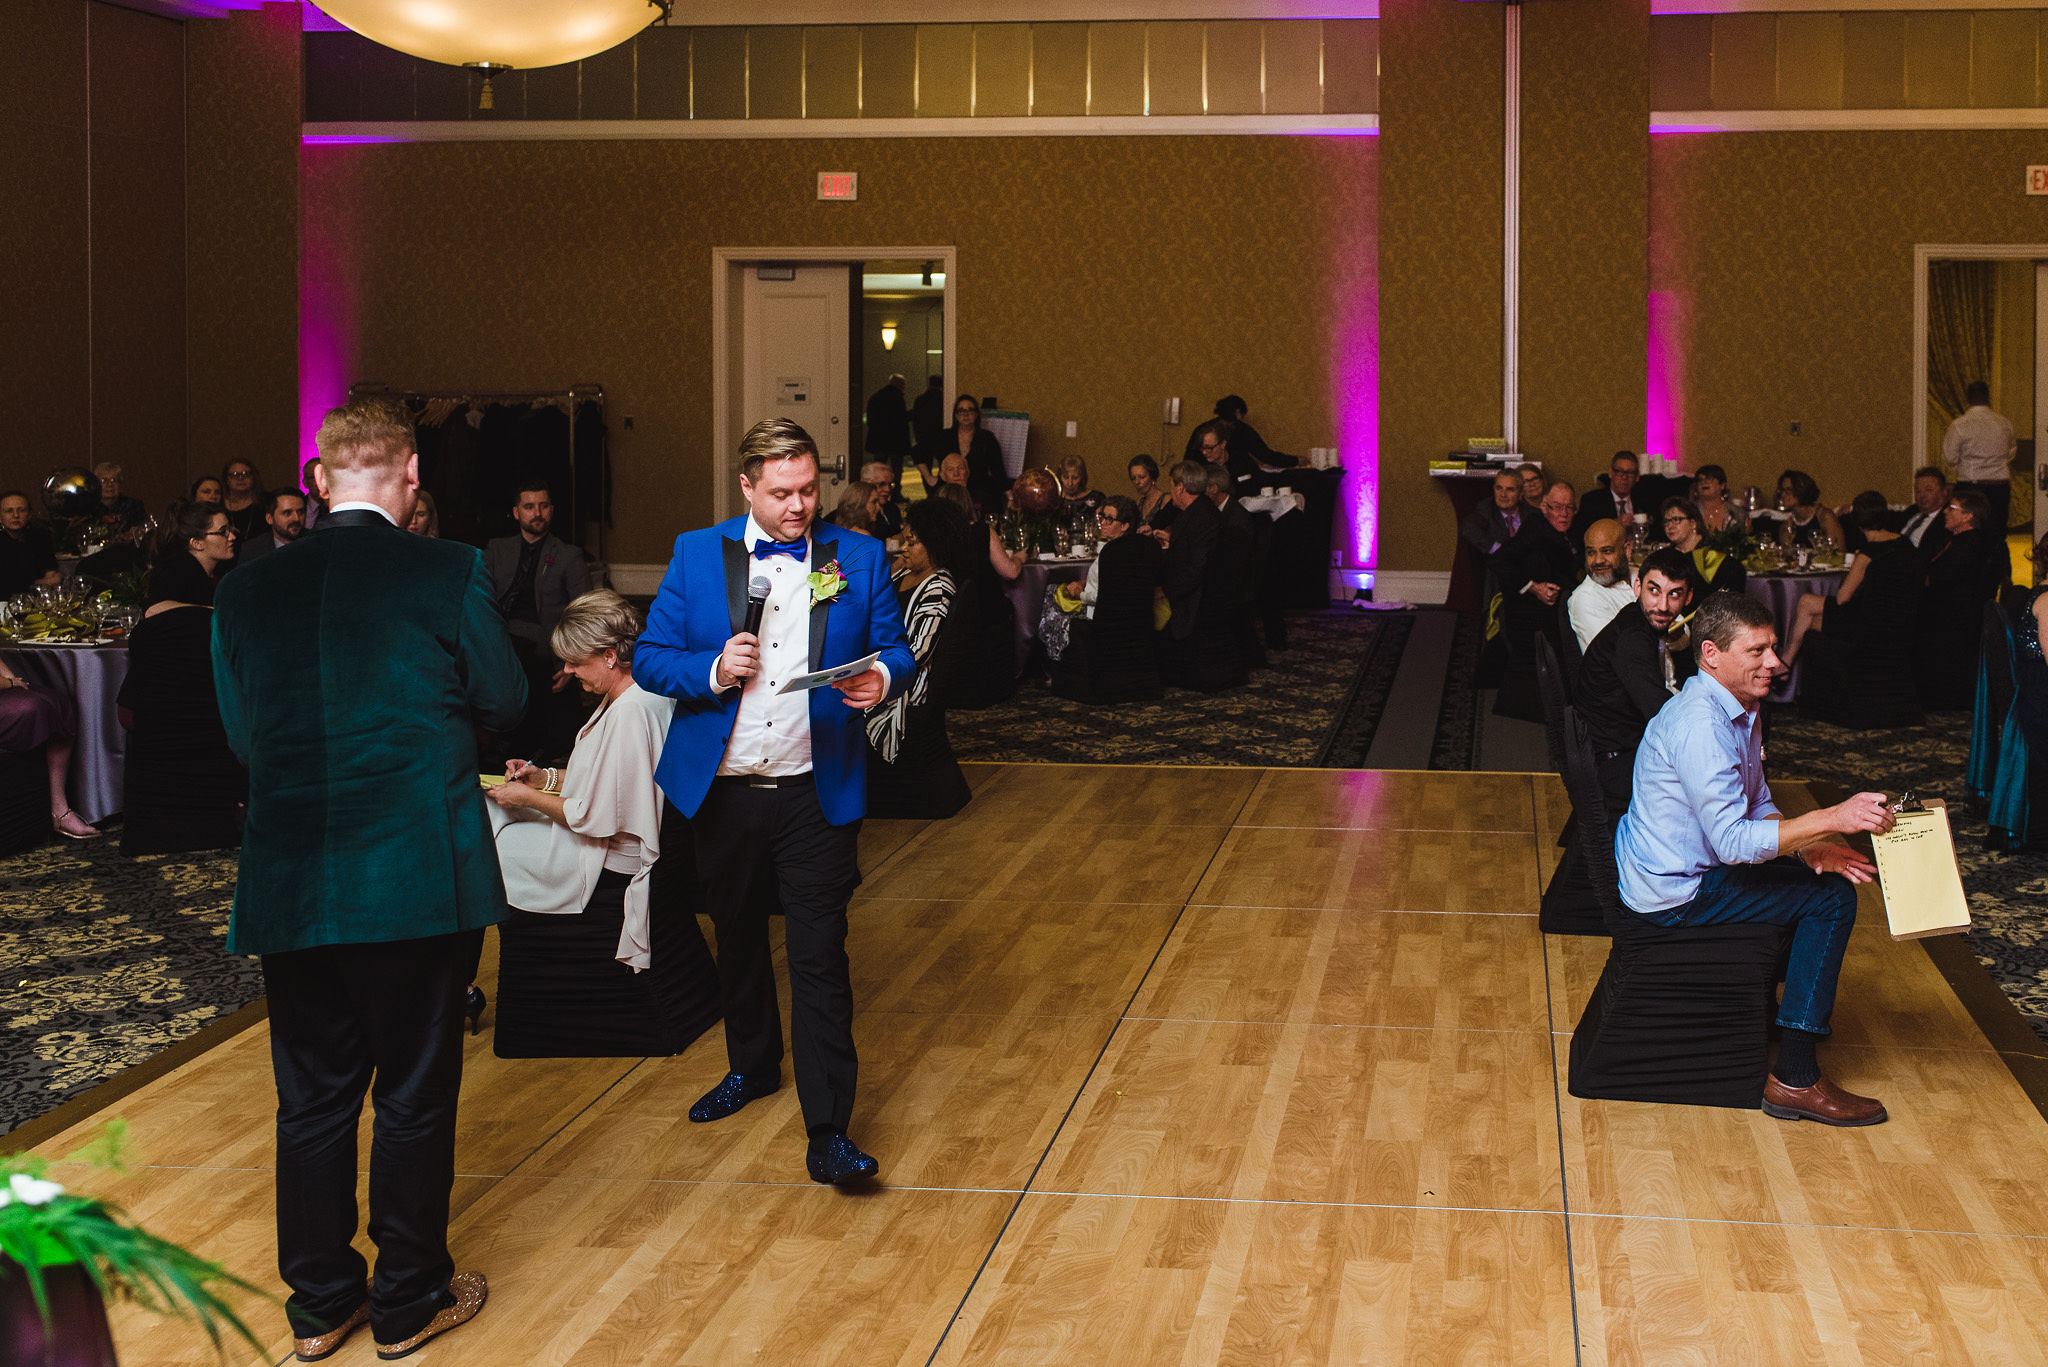 grooms reading game instructions into their microphones for their seated guests that are scribbling away on clipboards during a fun wedding at the Hilton Fallsview in Niagara Falls